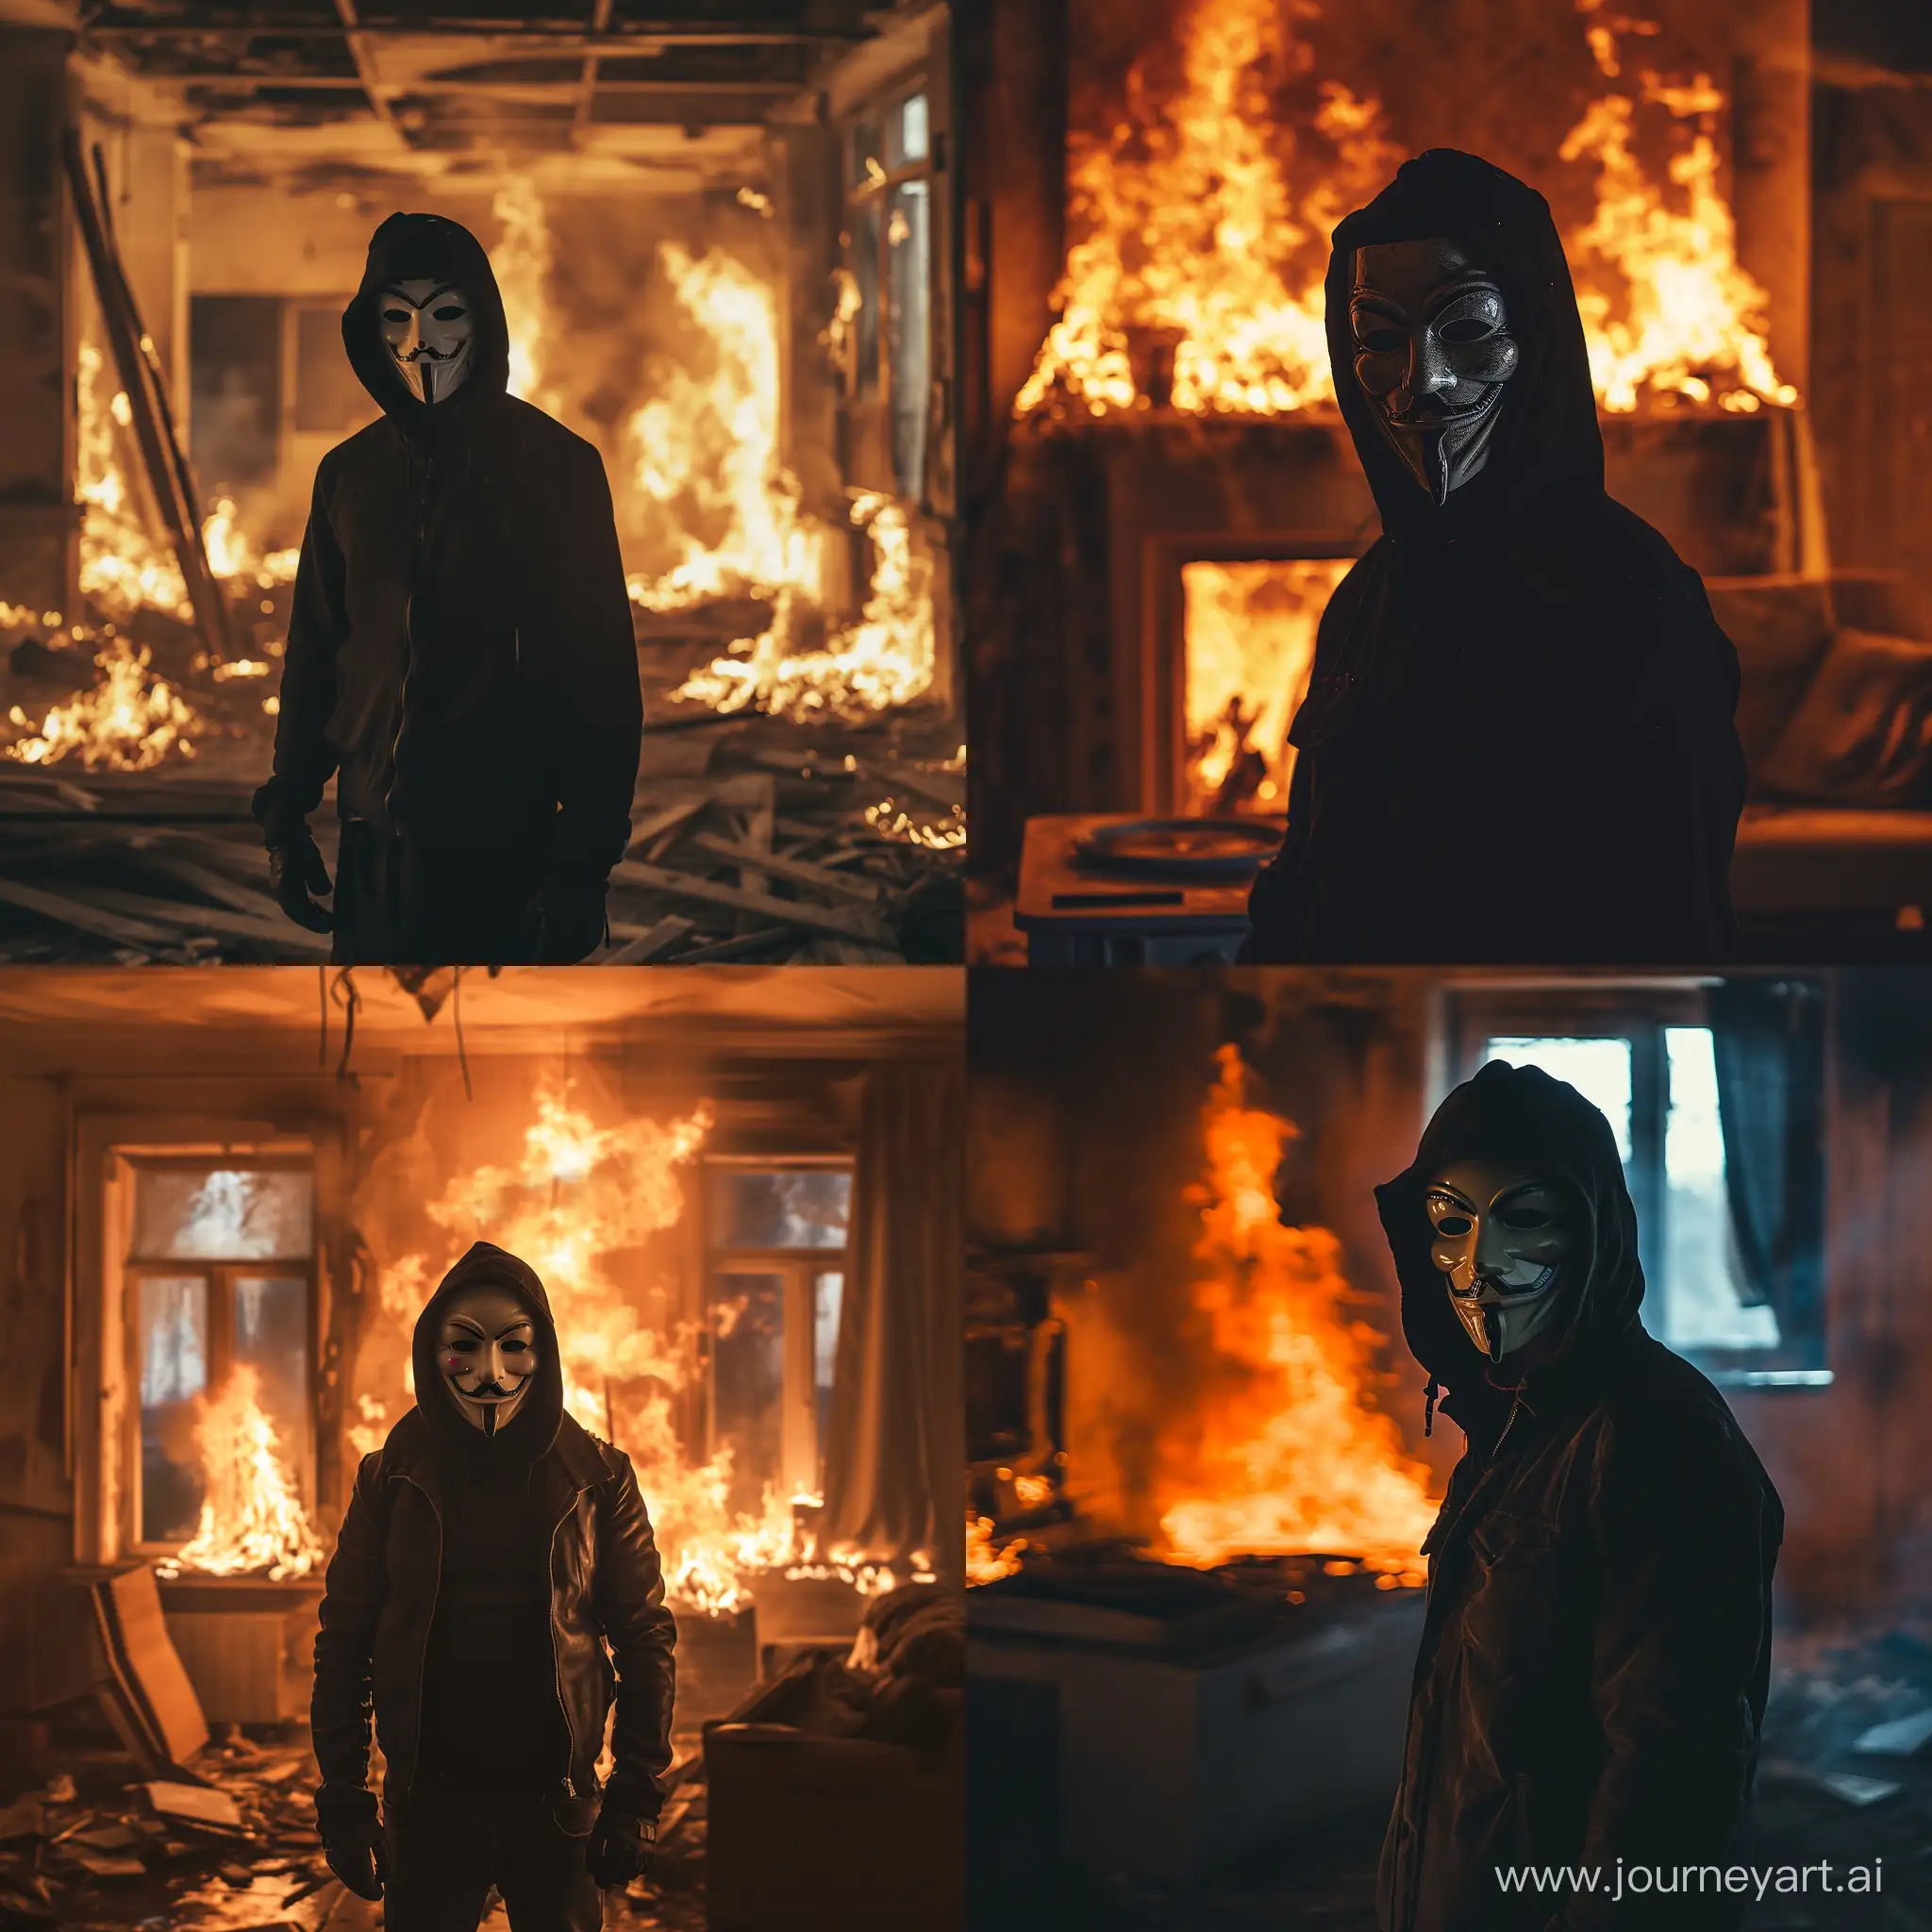 Anonymous-Masked-Man-in-the-Midst-of-a-Burning-Room